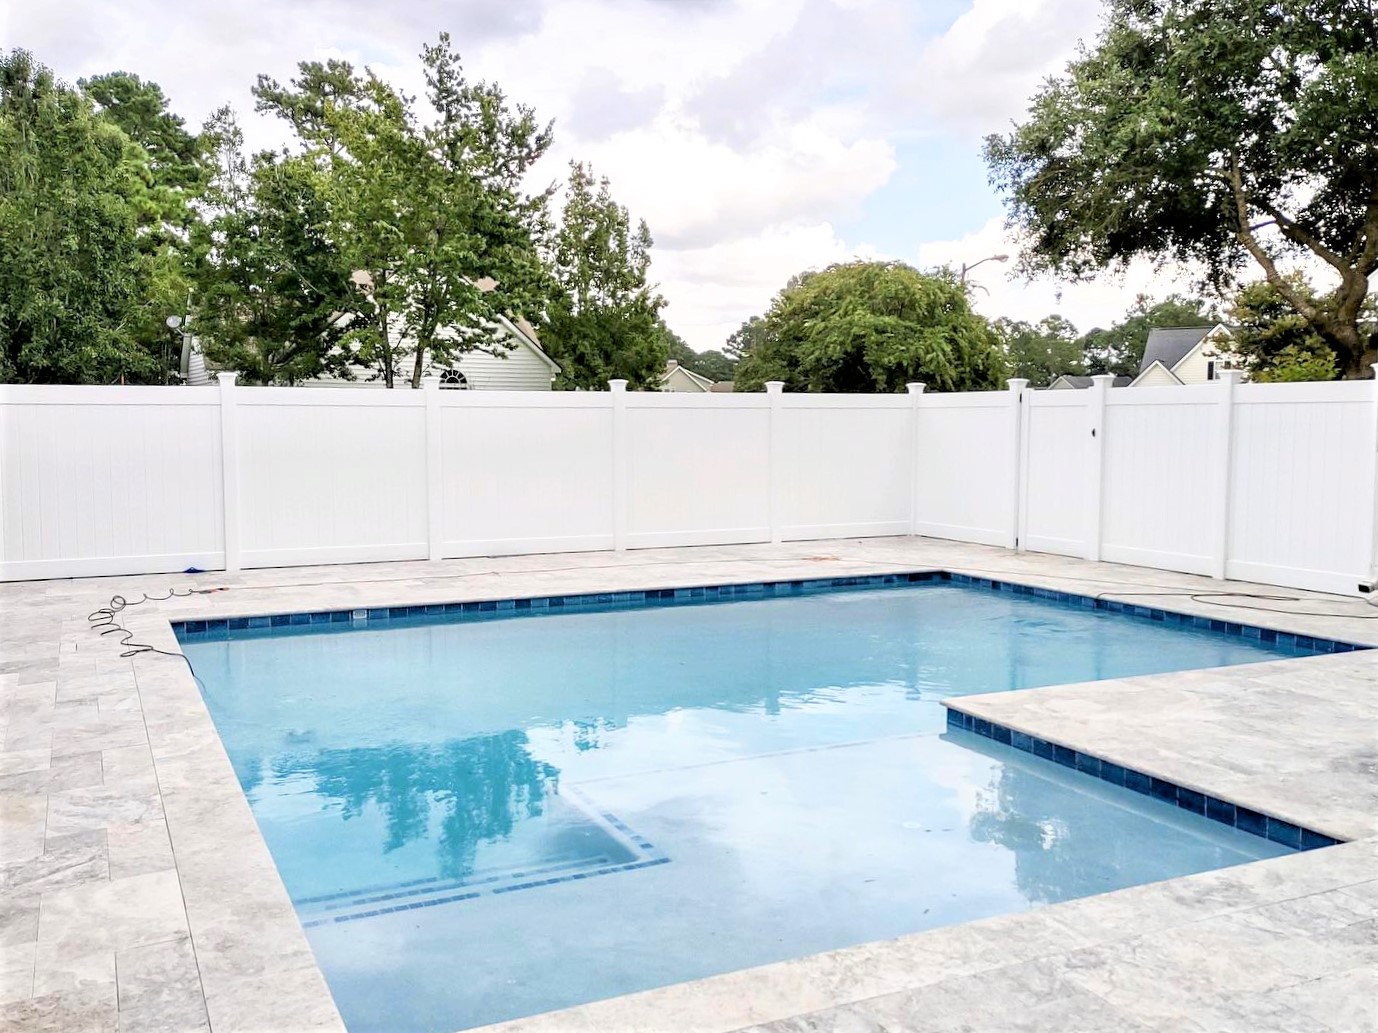 Photo of a white vinyl privacy pool fence